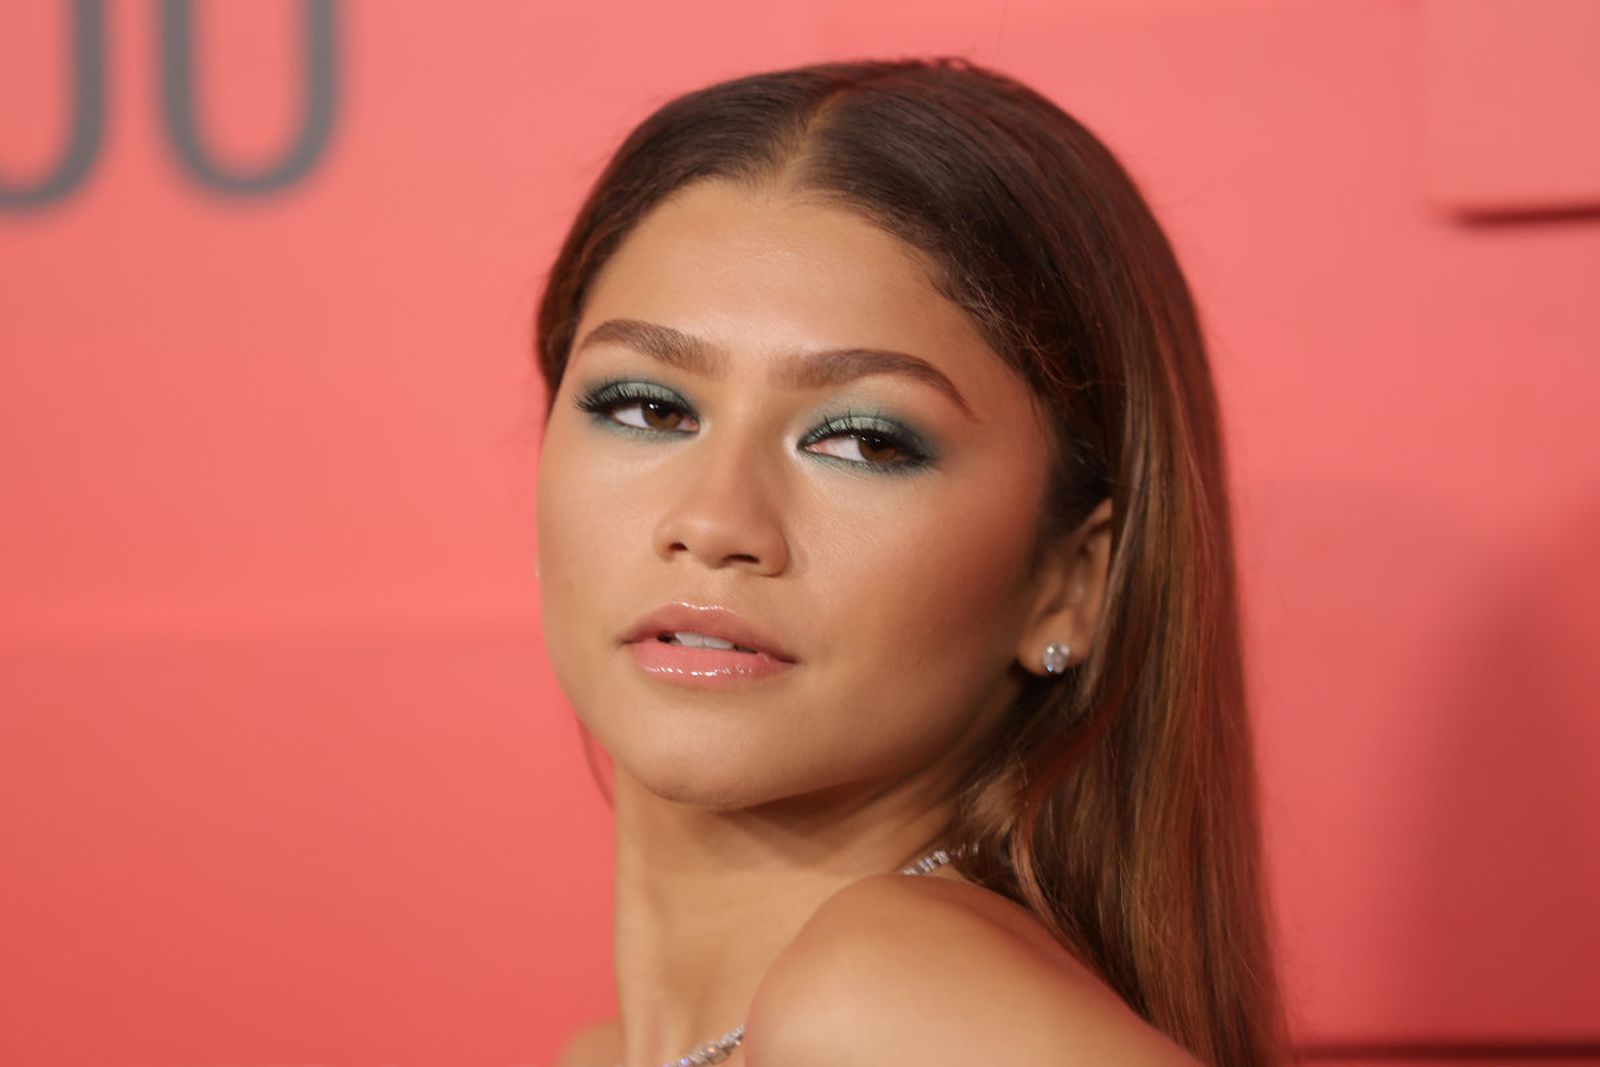 NEW YORK, NEW YORK - JUNE 08: Zendaya attends the 2022 Time 100 Gala at Frederick P. Rose Hall, Jazz at Lincoln Center on June 08, 2022 in New York City. (Photo by Michael Loccisano/Getty Images)